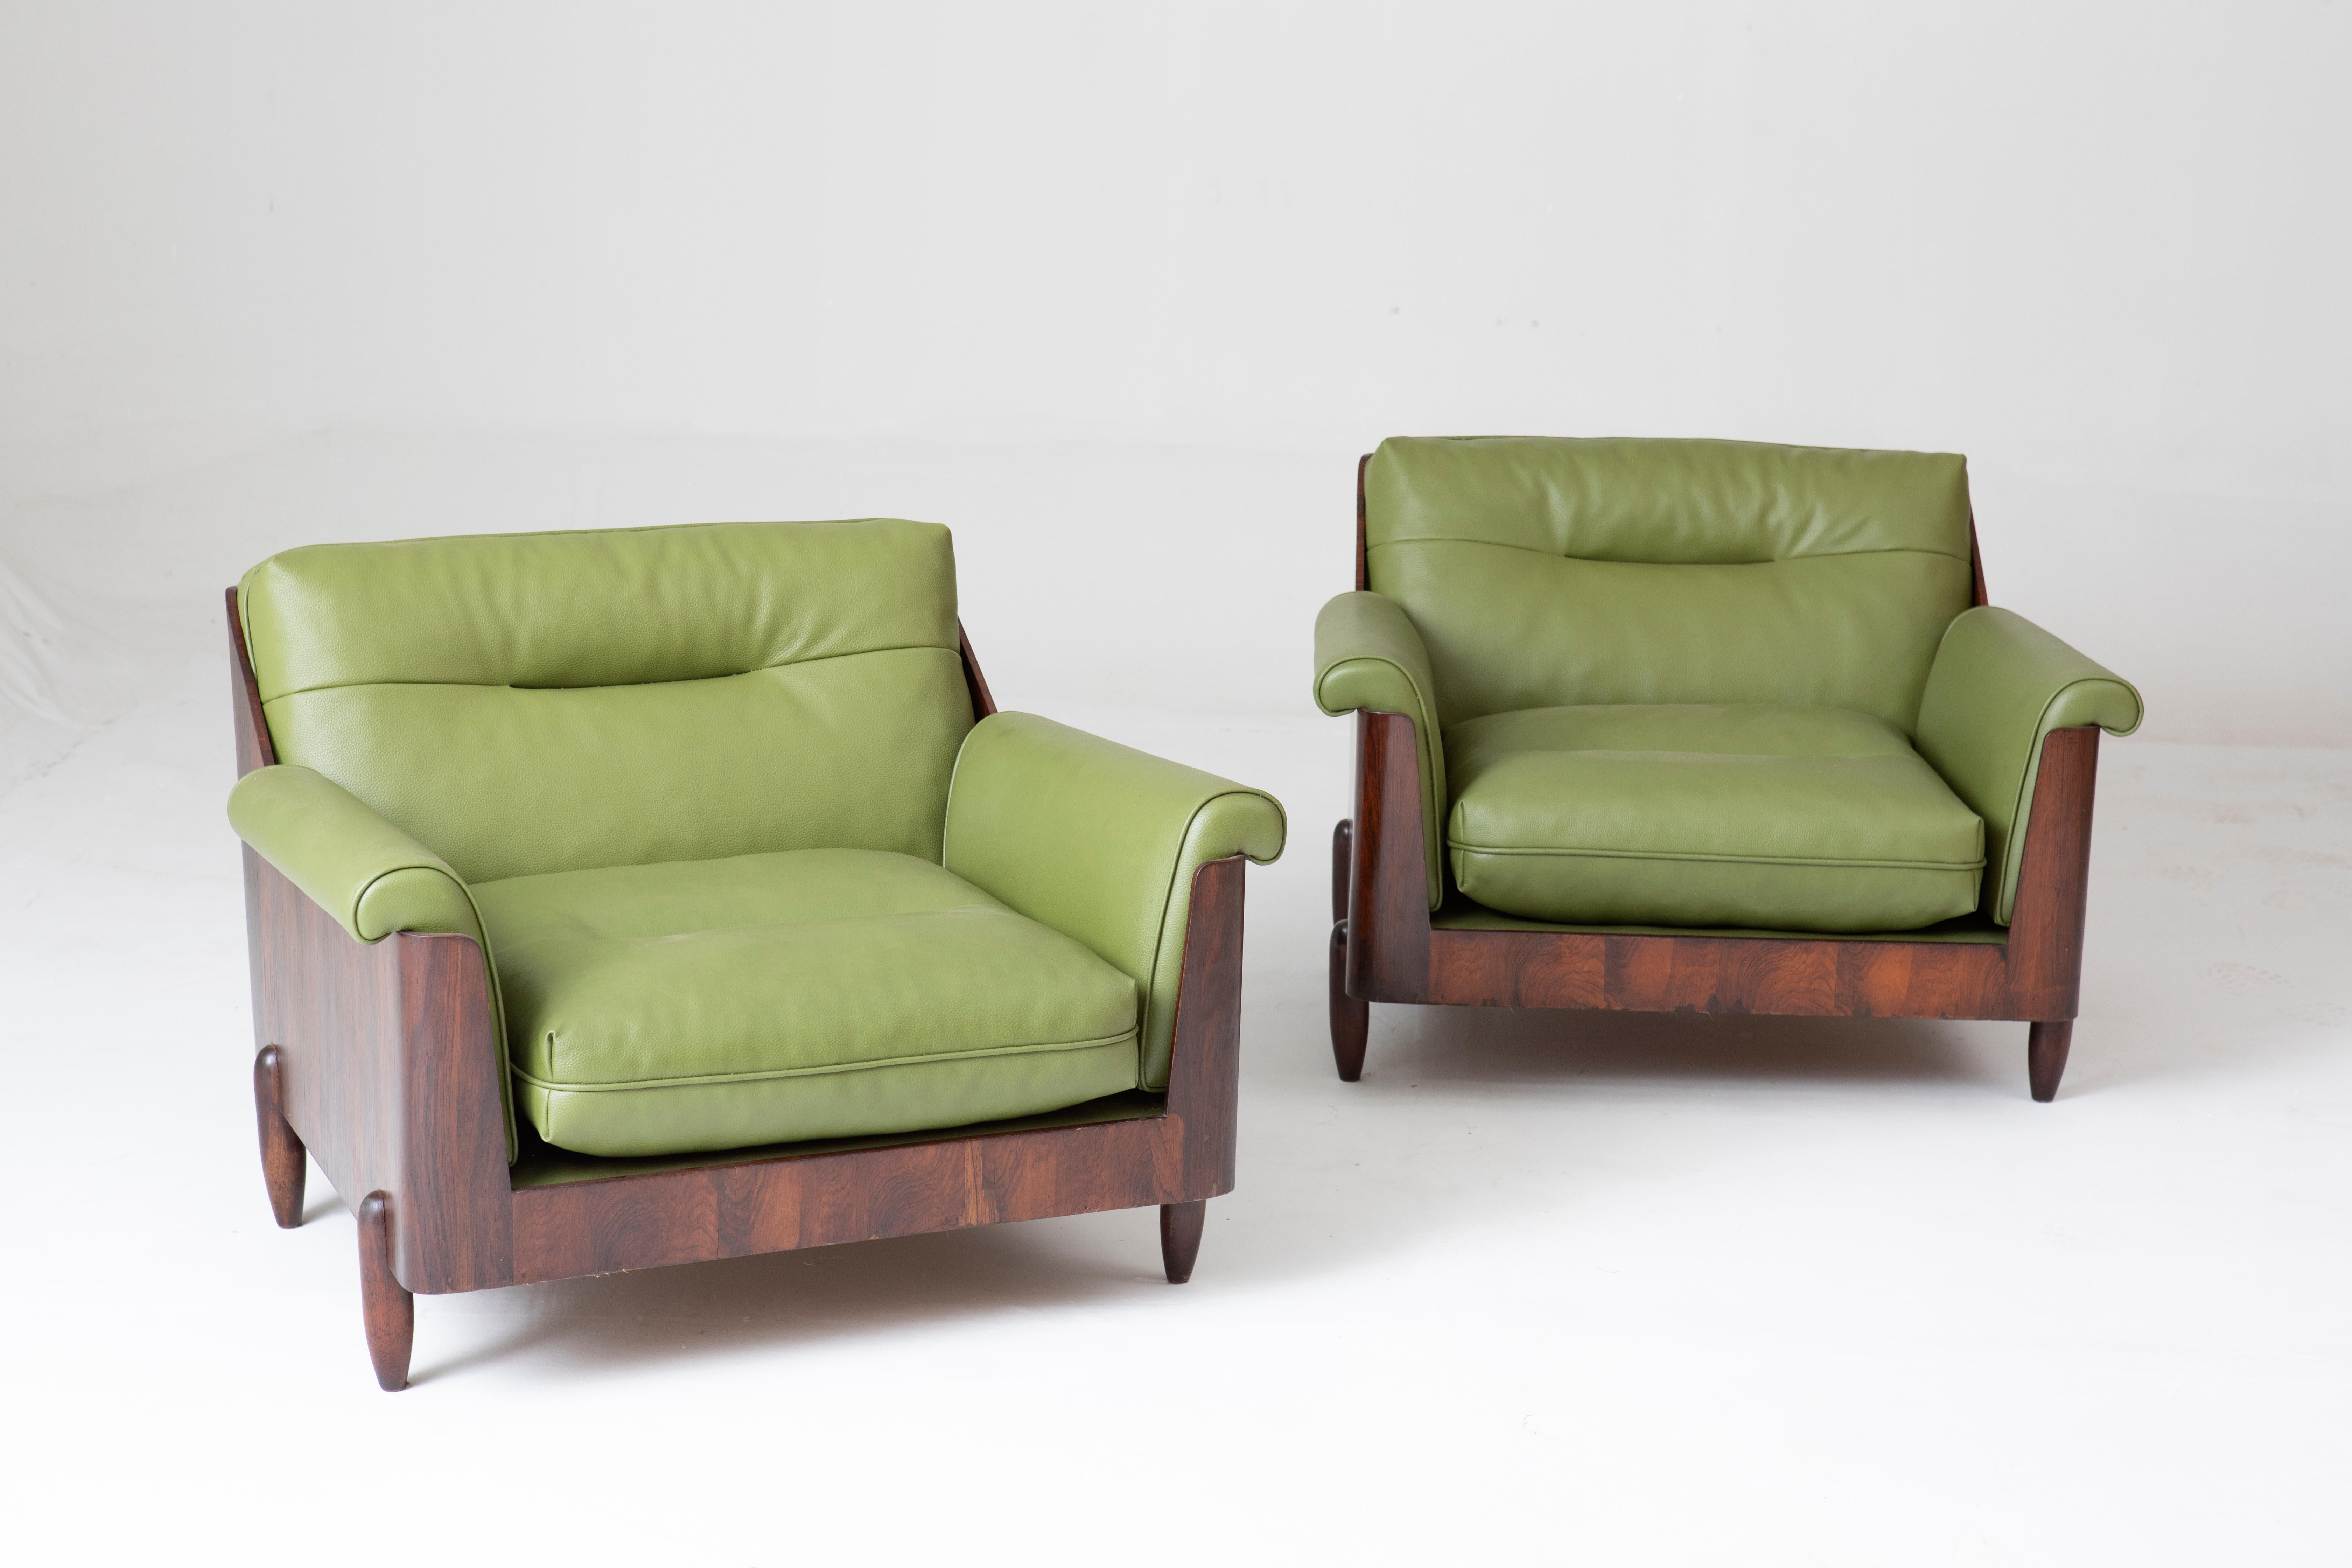 Brazilian Mid-Century Modern Pair of Armchairs by Novo Rumo, 1960s For Sale